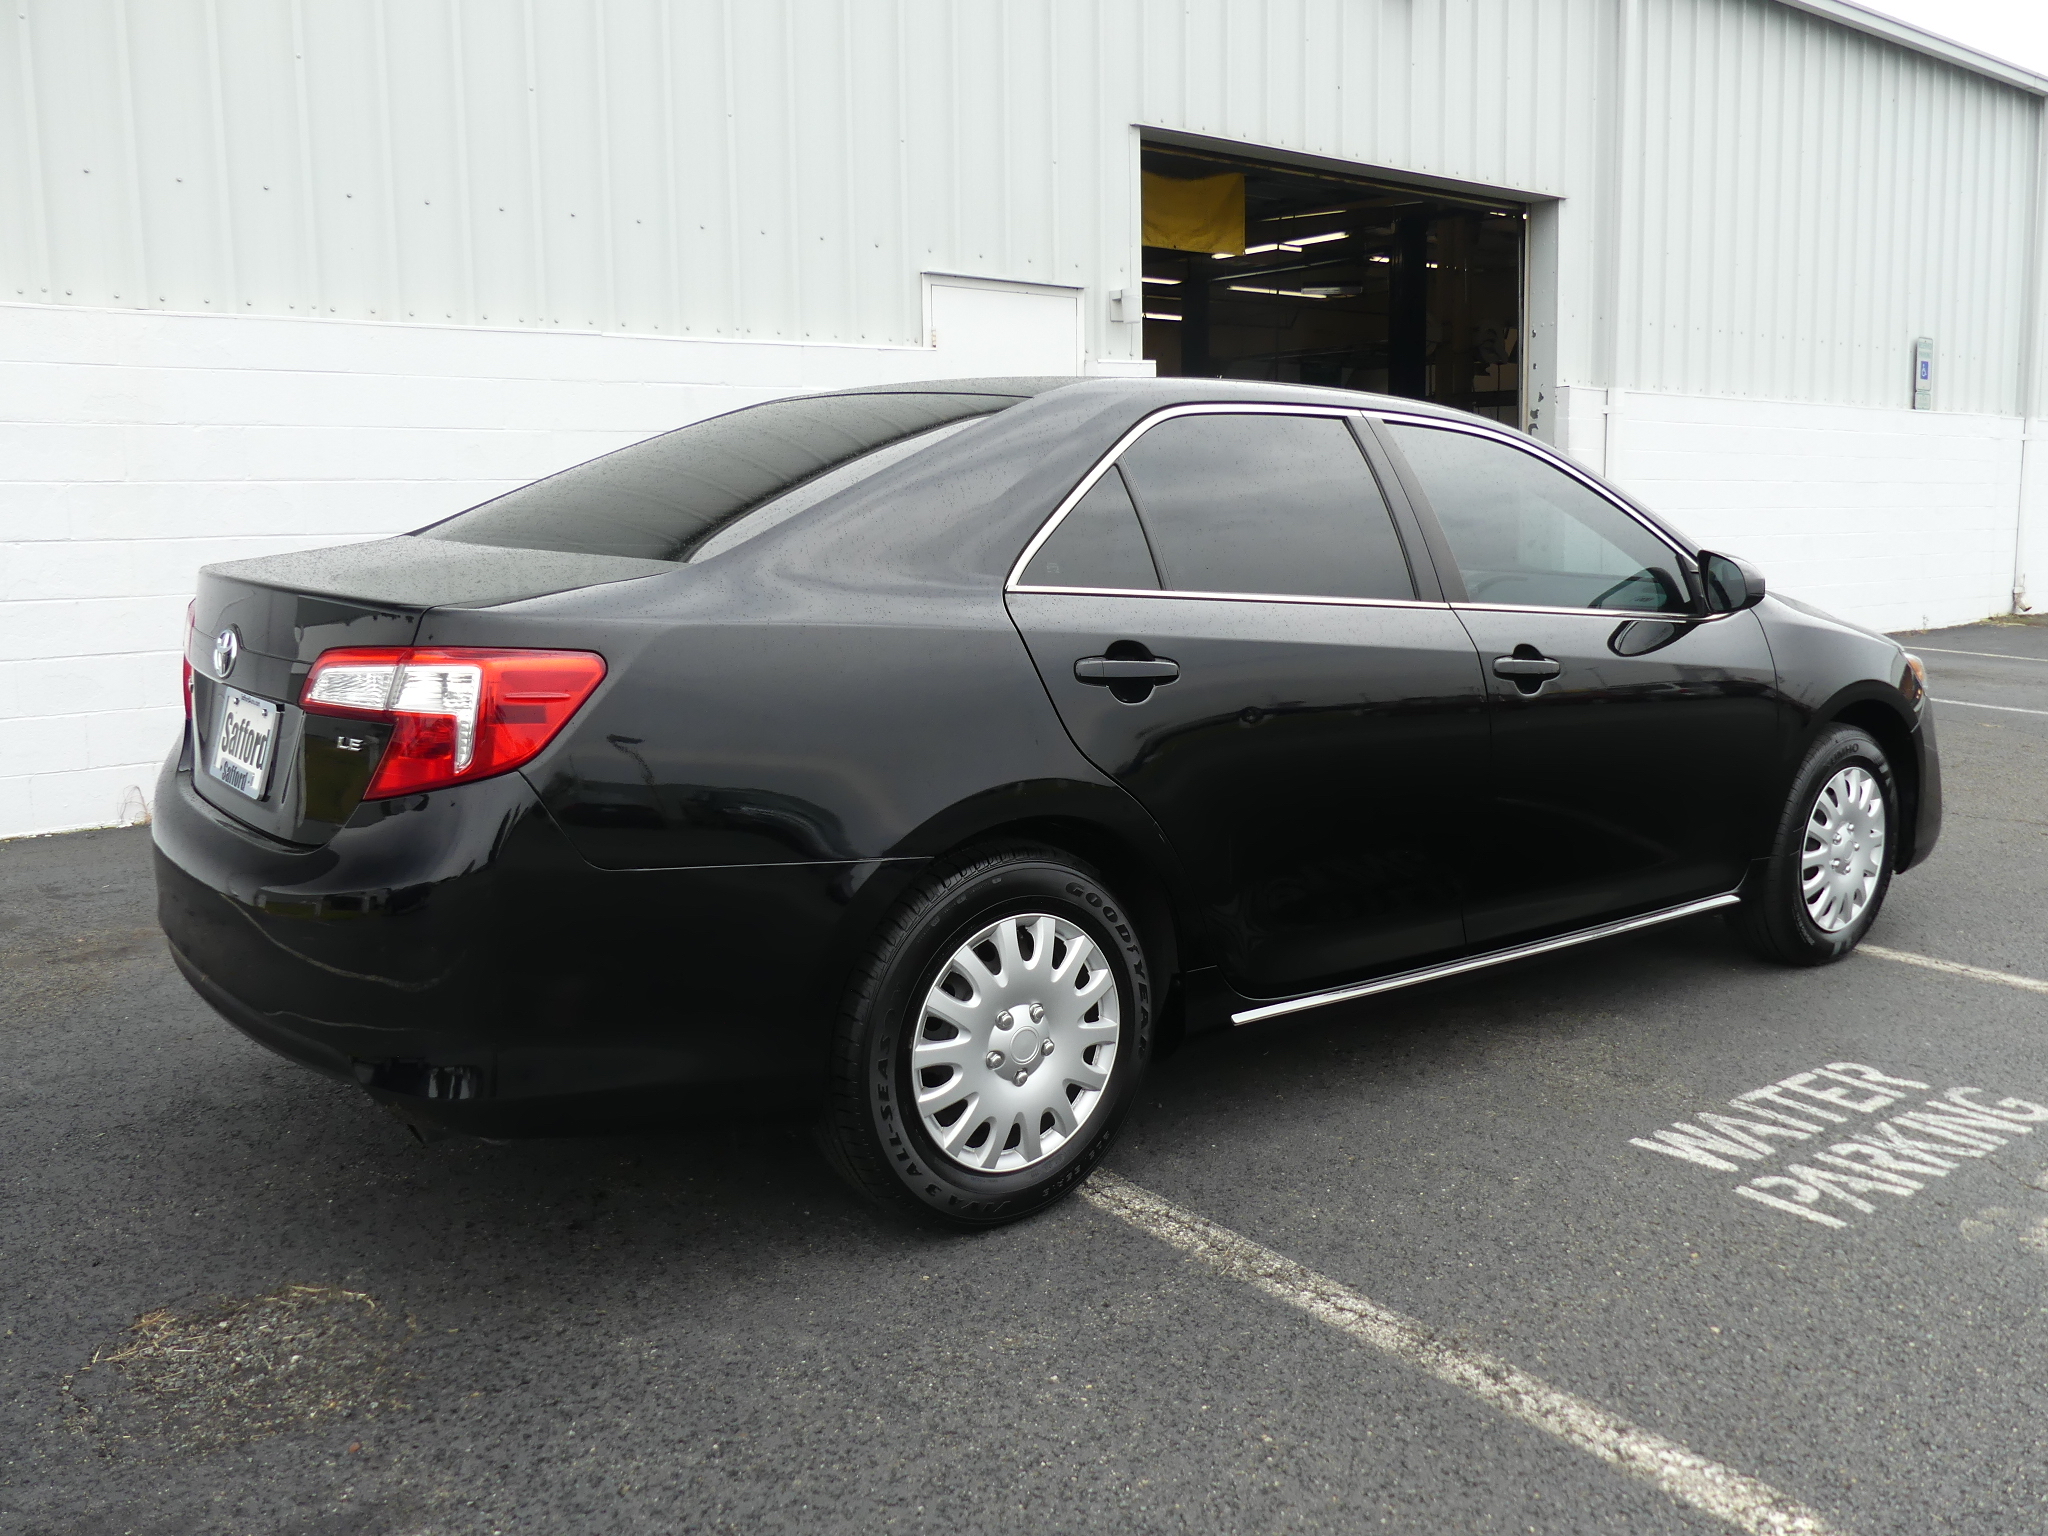 Pre-Owned 2014 Toyota Camry 4dr Sdn I4 Auto LE (Natl) *Ltd Avail* 4dr ...
